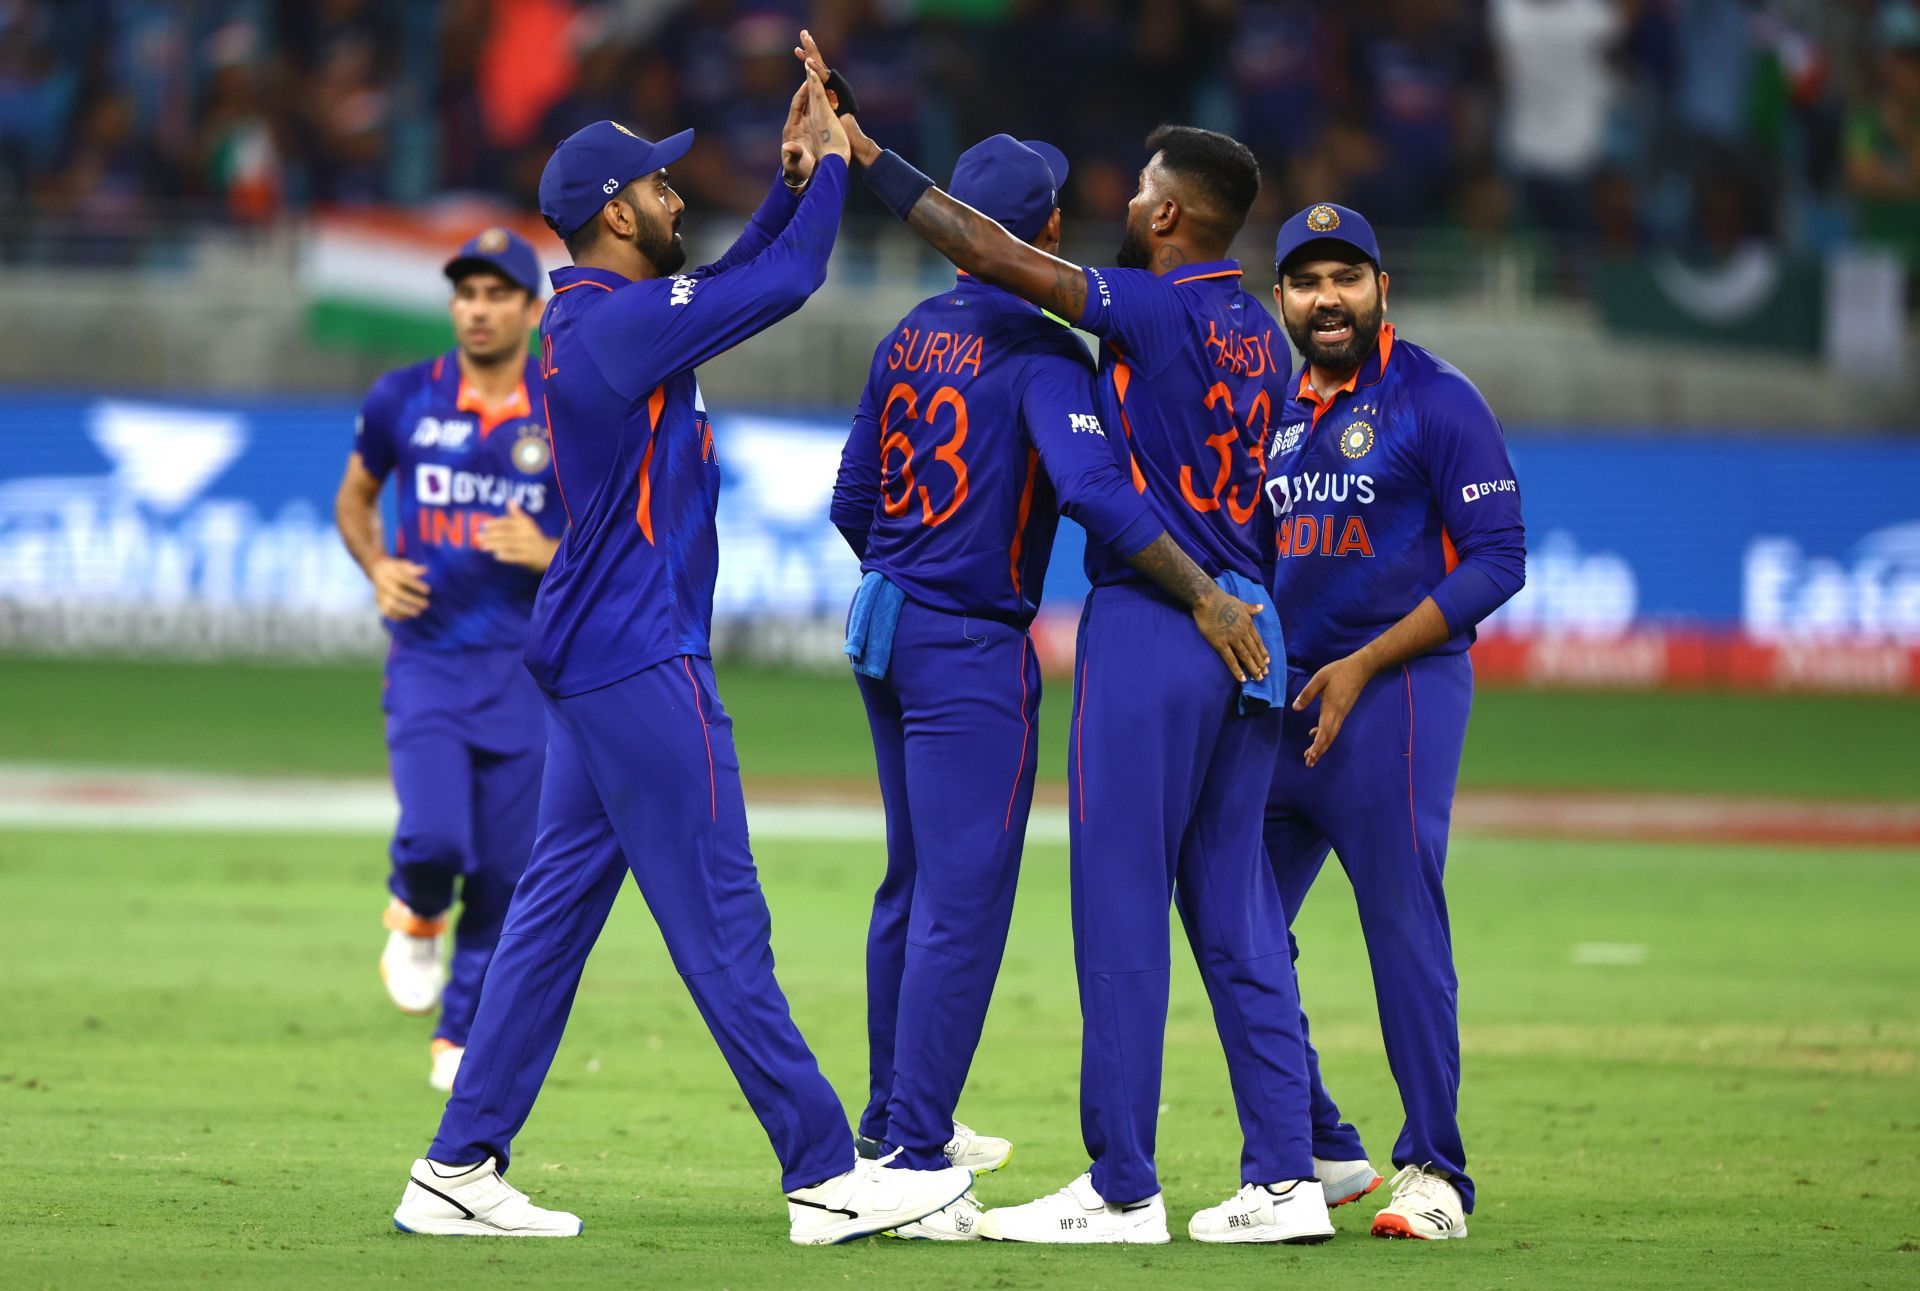 Team India celebrate a wicket against Pakistan. Pic: Getty Images